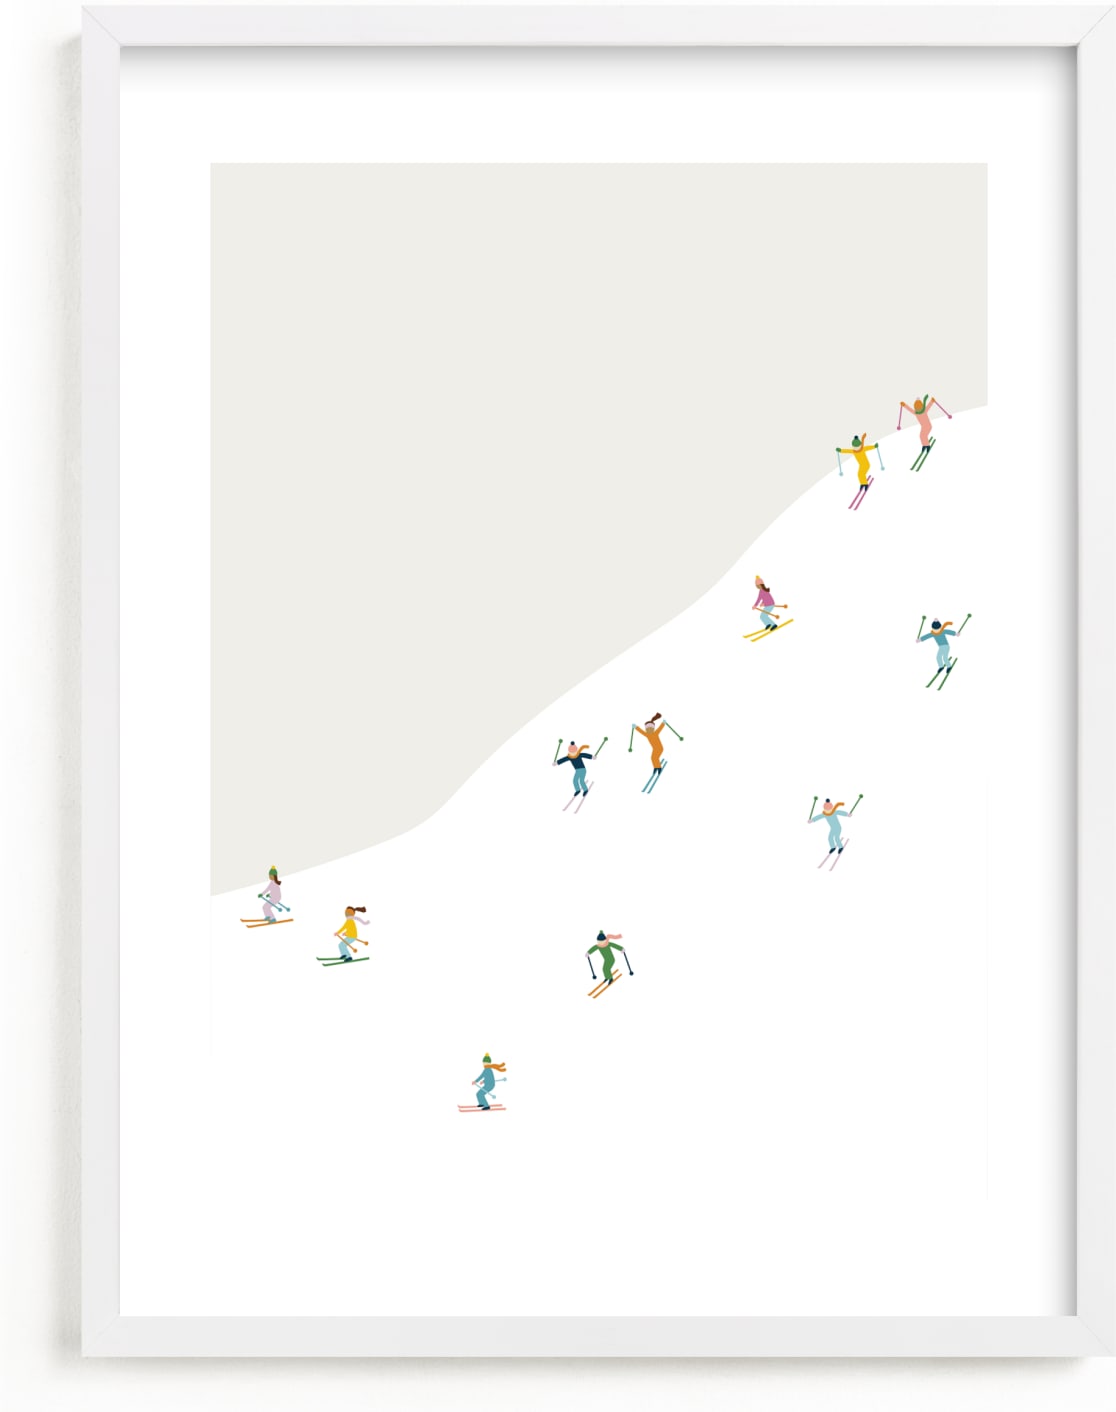 This is a colorful kids wall art by Ellen Schlegelmilch called happy skiers.